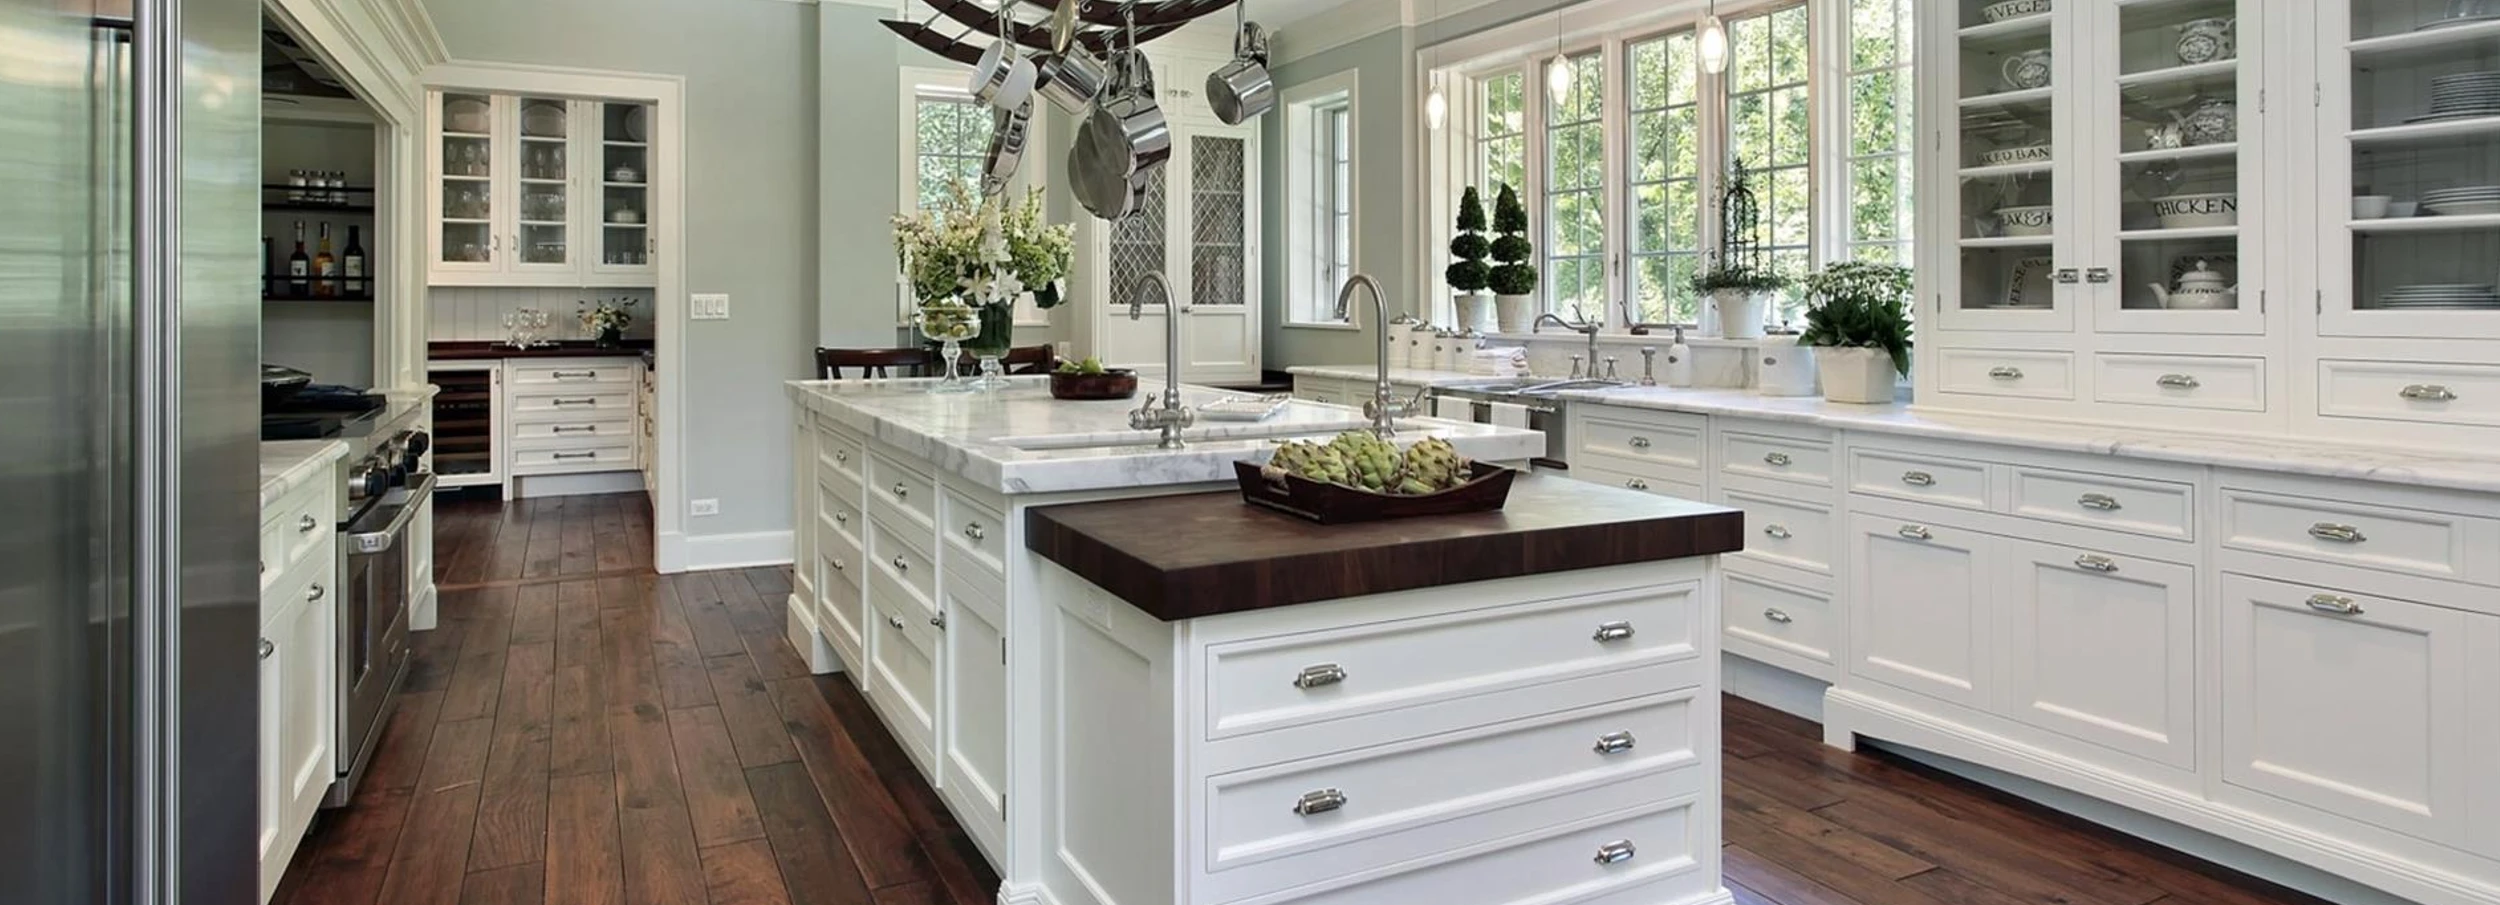 A kitchen with white cabinets, a center island with black countertop and wood floors.